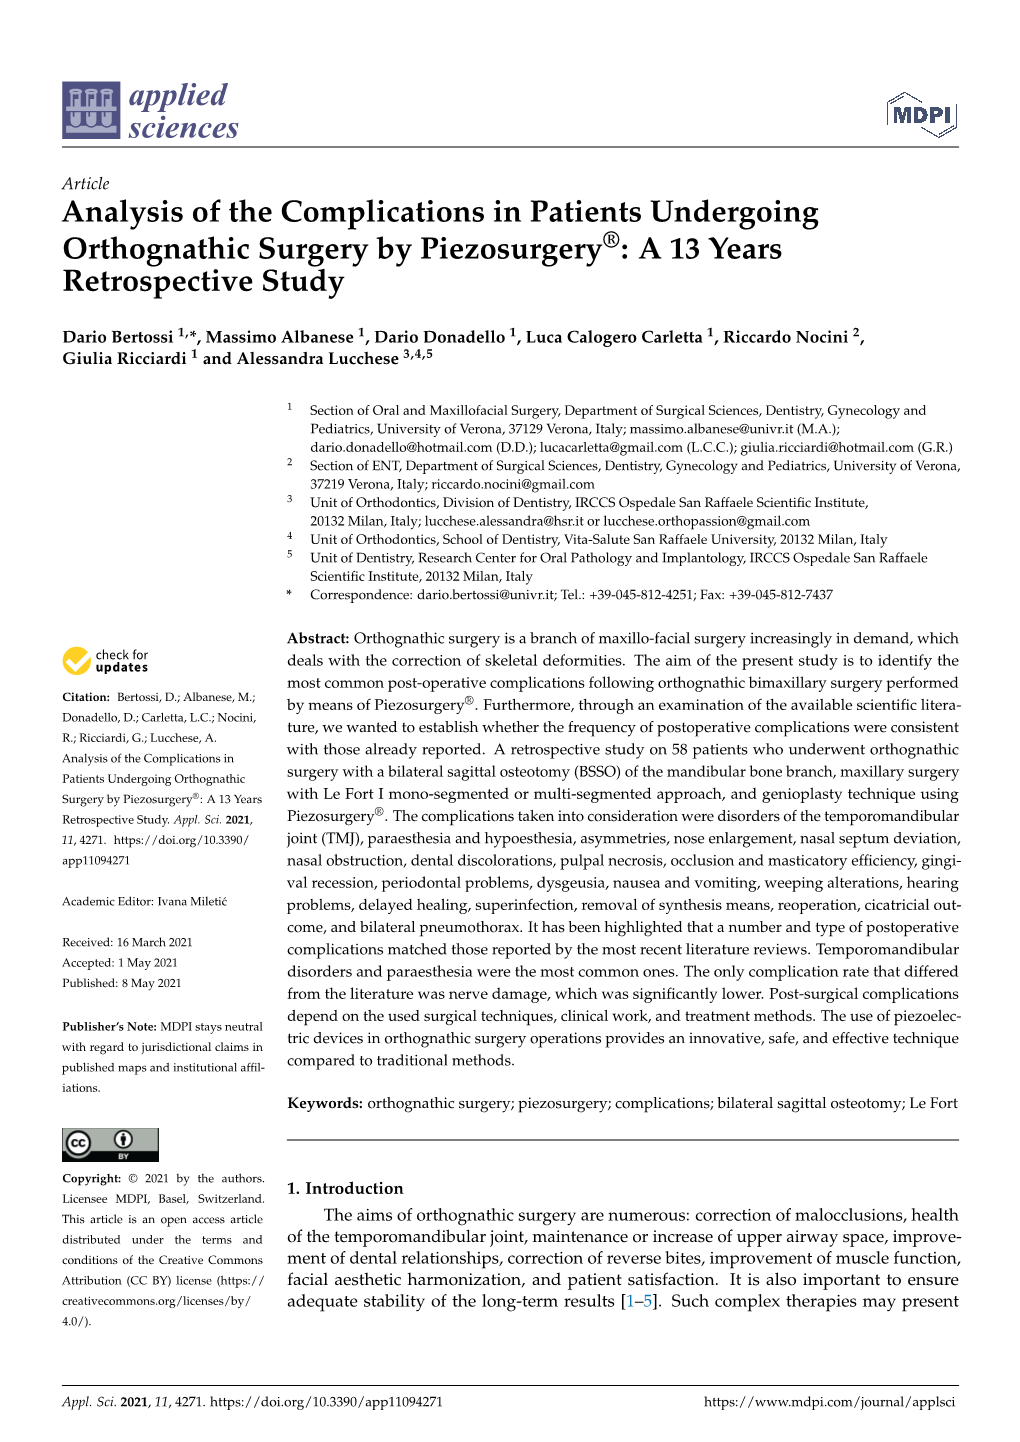 Analysis of the Complications in Patients Undergoing Orthognathic Surgery by Piezosurgery®: a 13 Years Retrospective Study